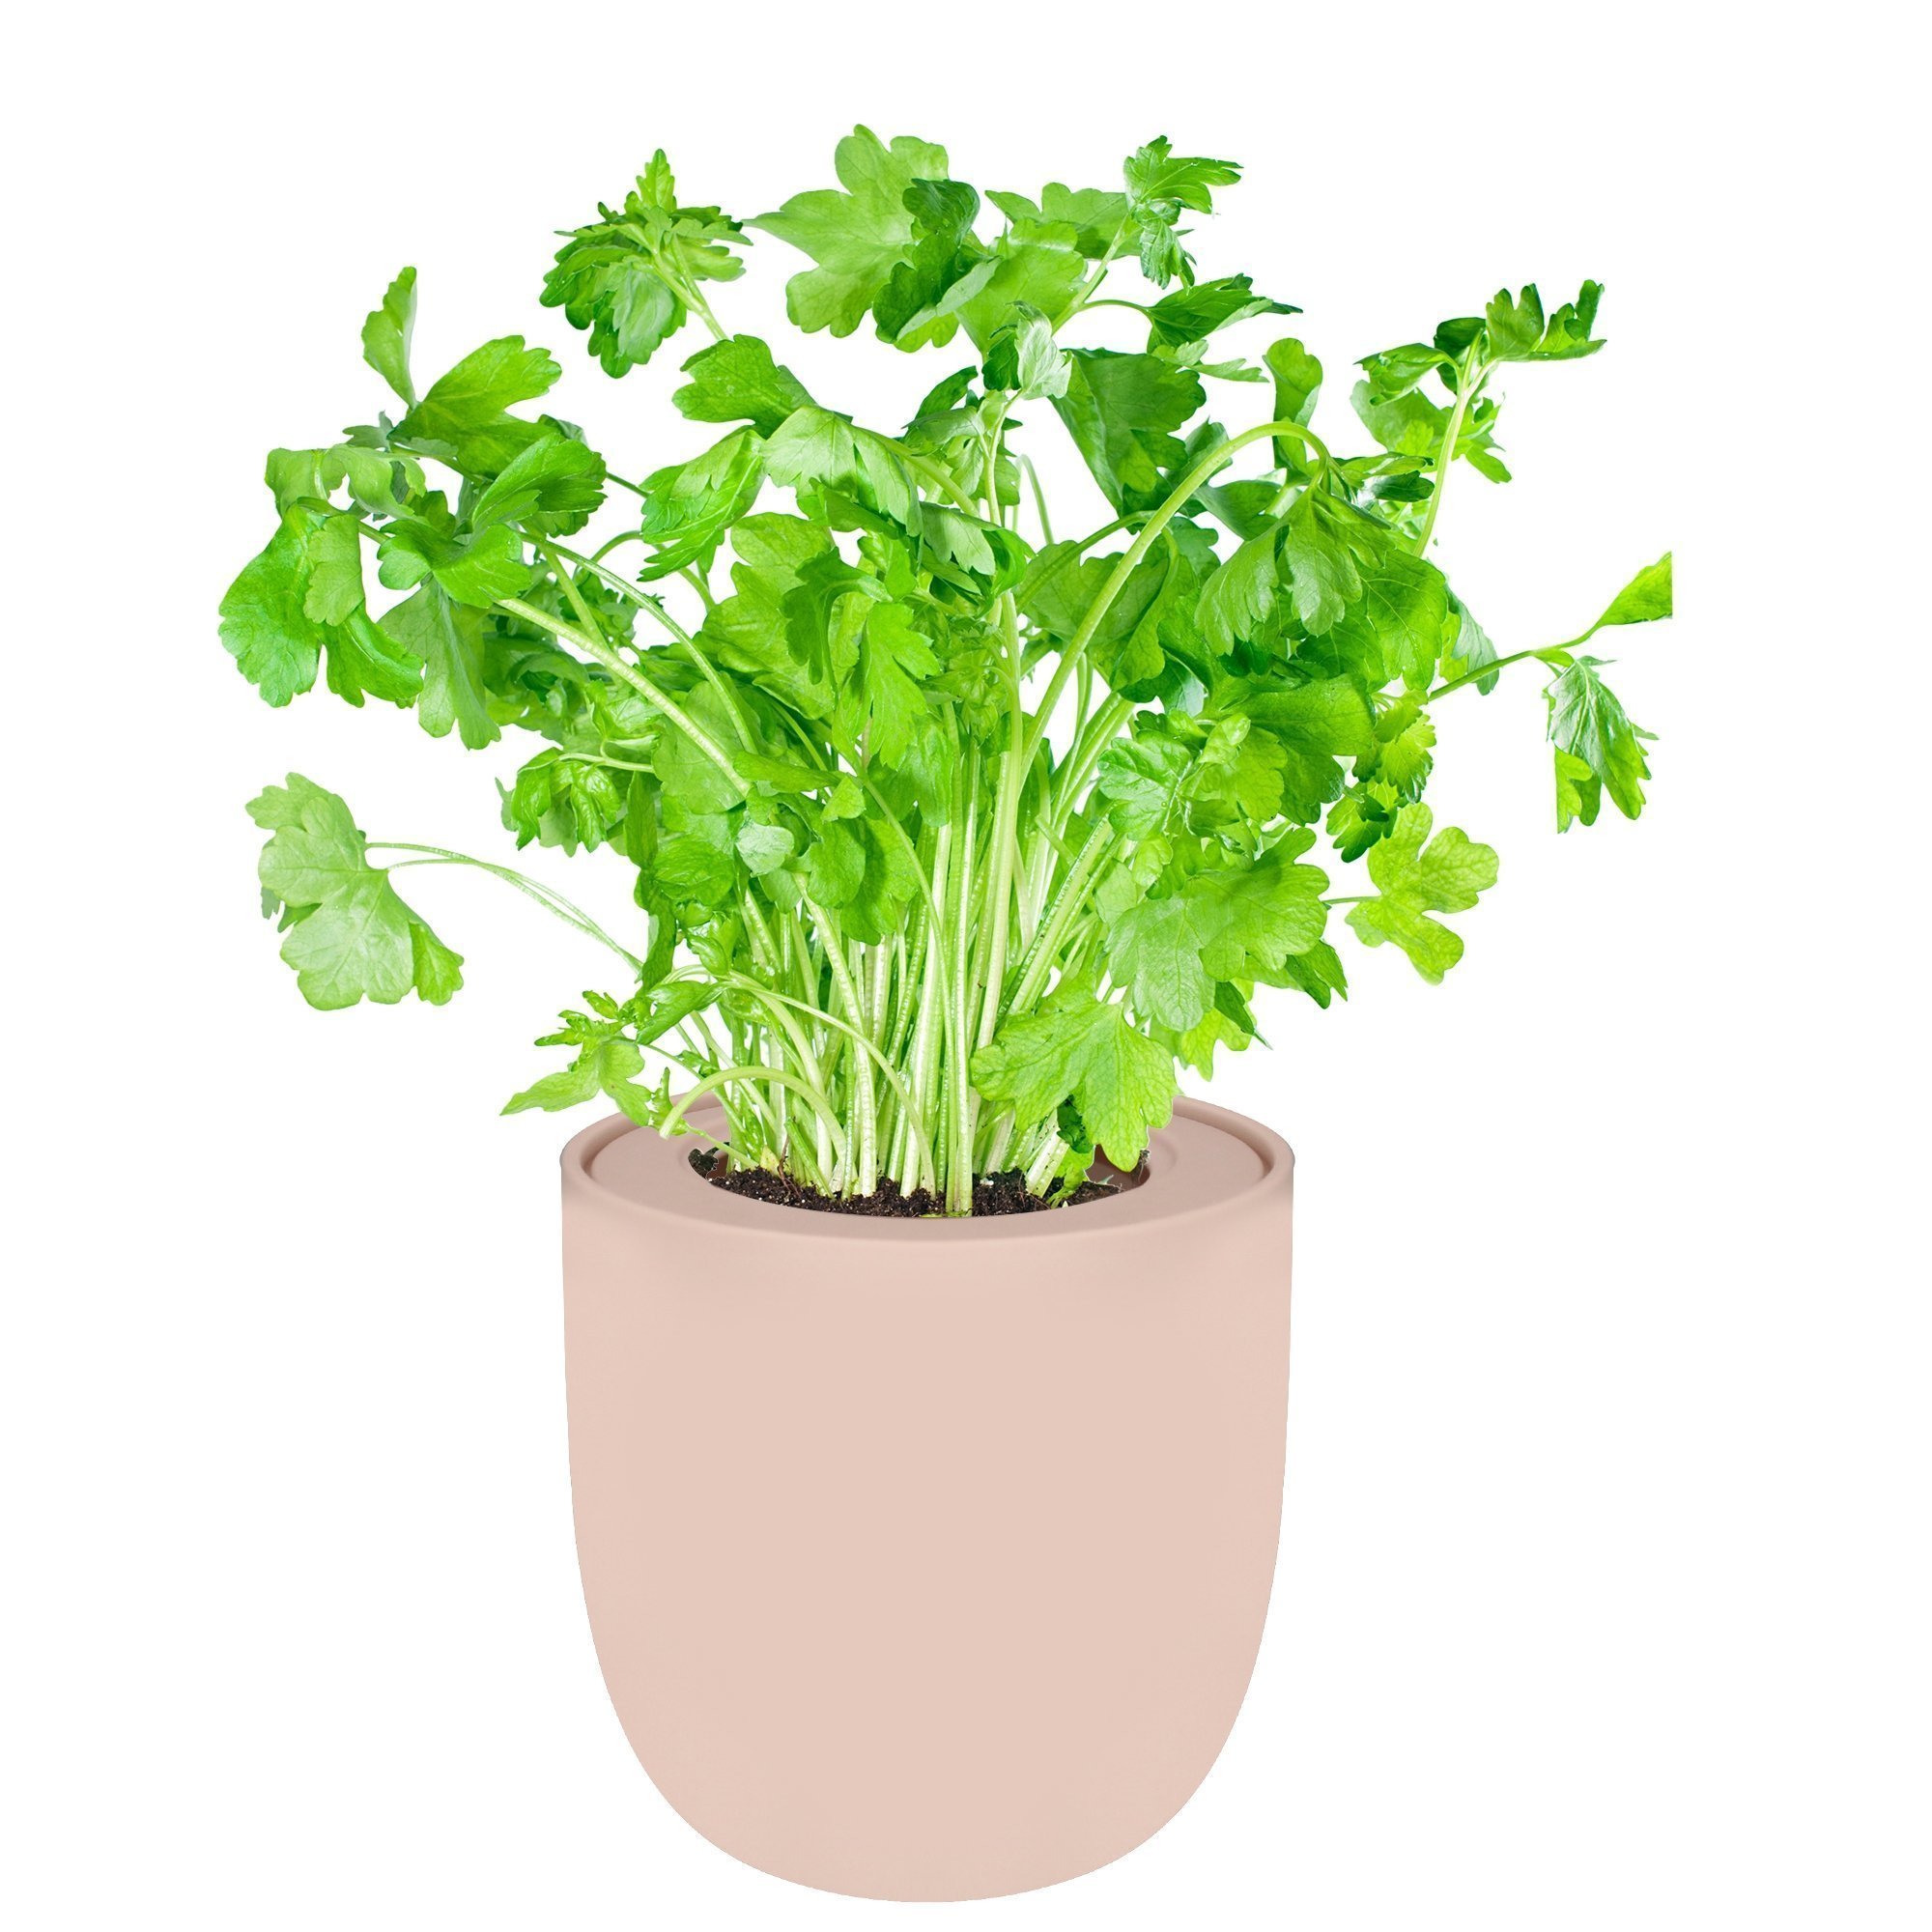 Parsley Pink Ceramic Pot Hydroponic Growing Kit with Organic Seeds